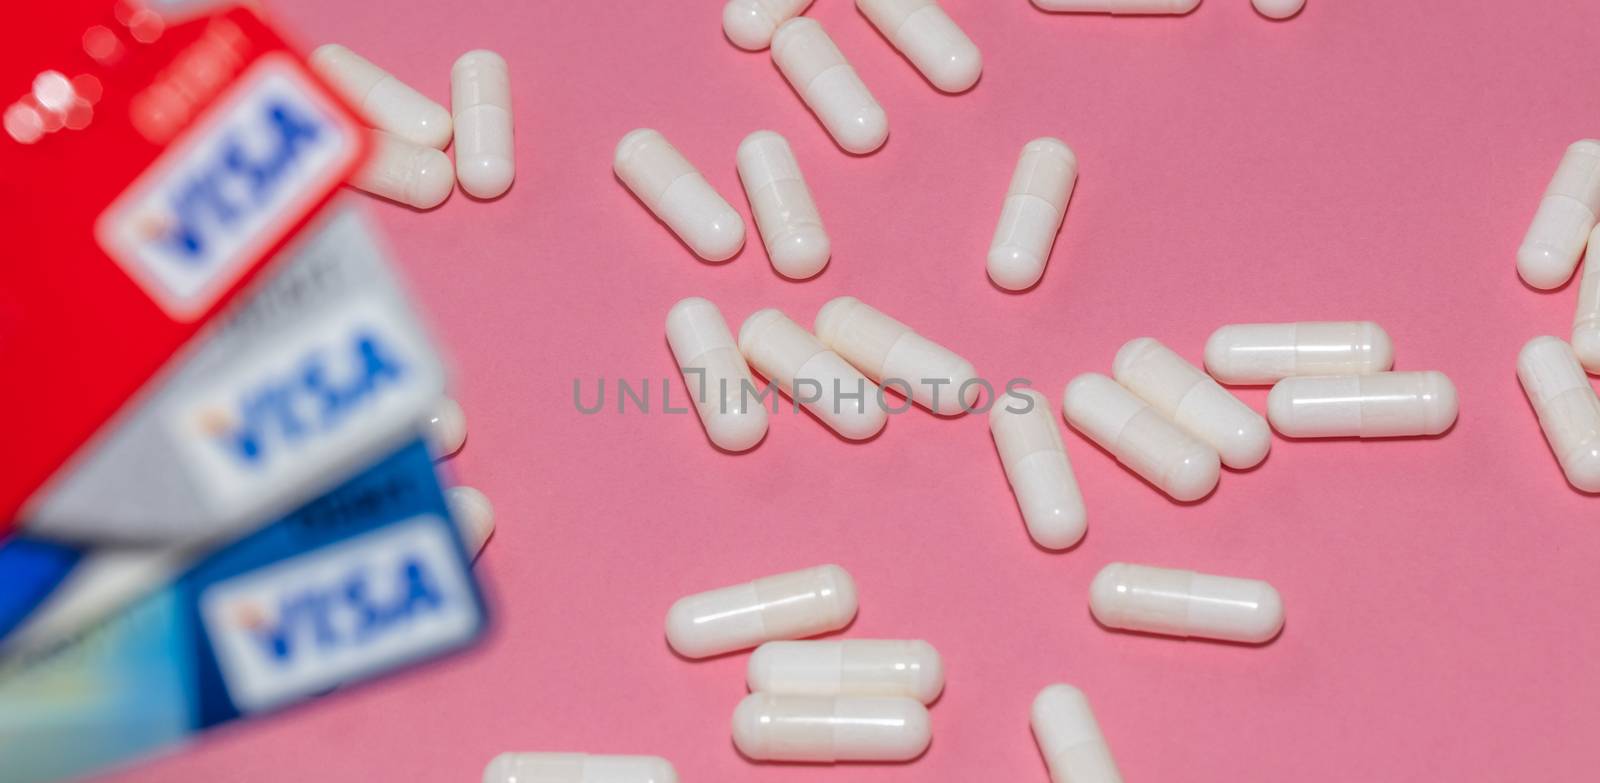 Barnaul, Russia - October 13, 2020: High angle shot of white pills on pink background with three red, silver, blue visa debit cards out of focus in the foreground. Pharmaceutical business concept. by DamantisZ